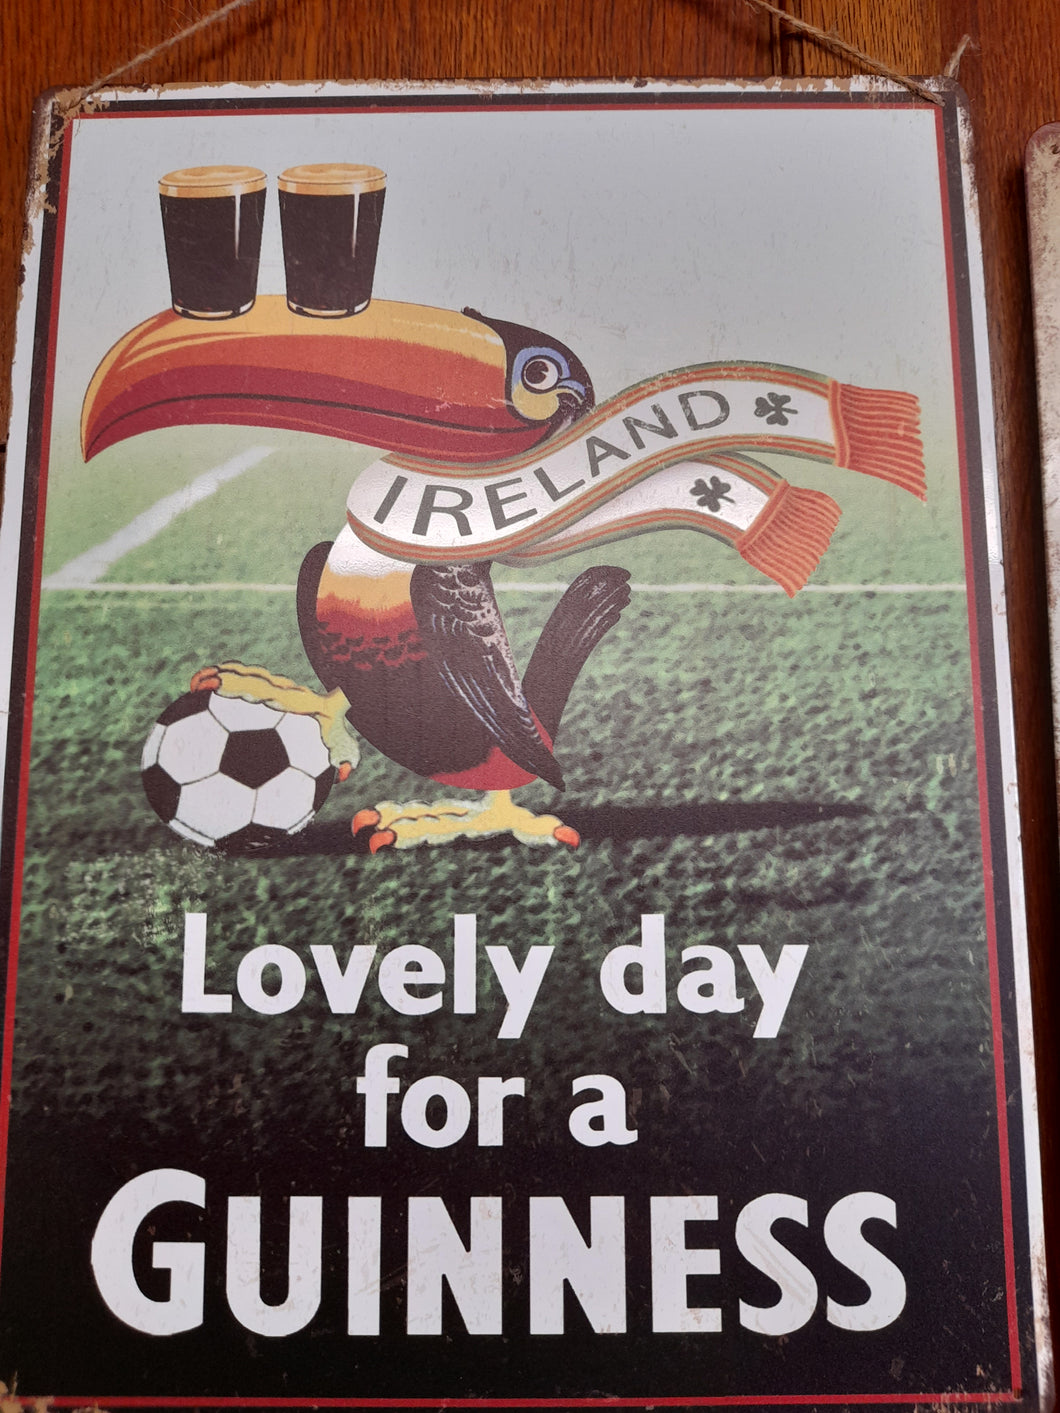 Lovely day for a Guinness vintage style metal sign